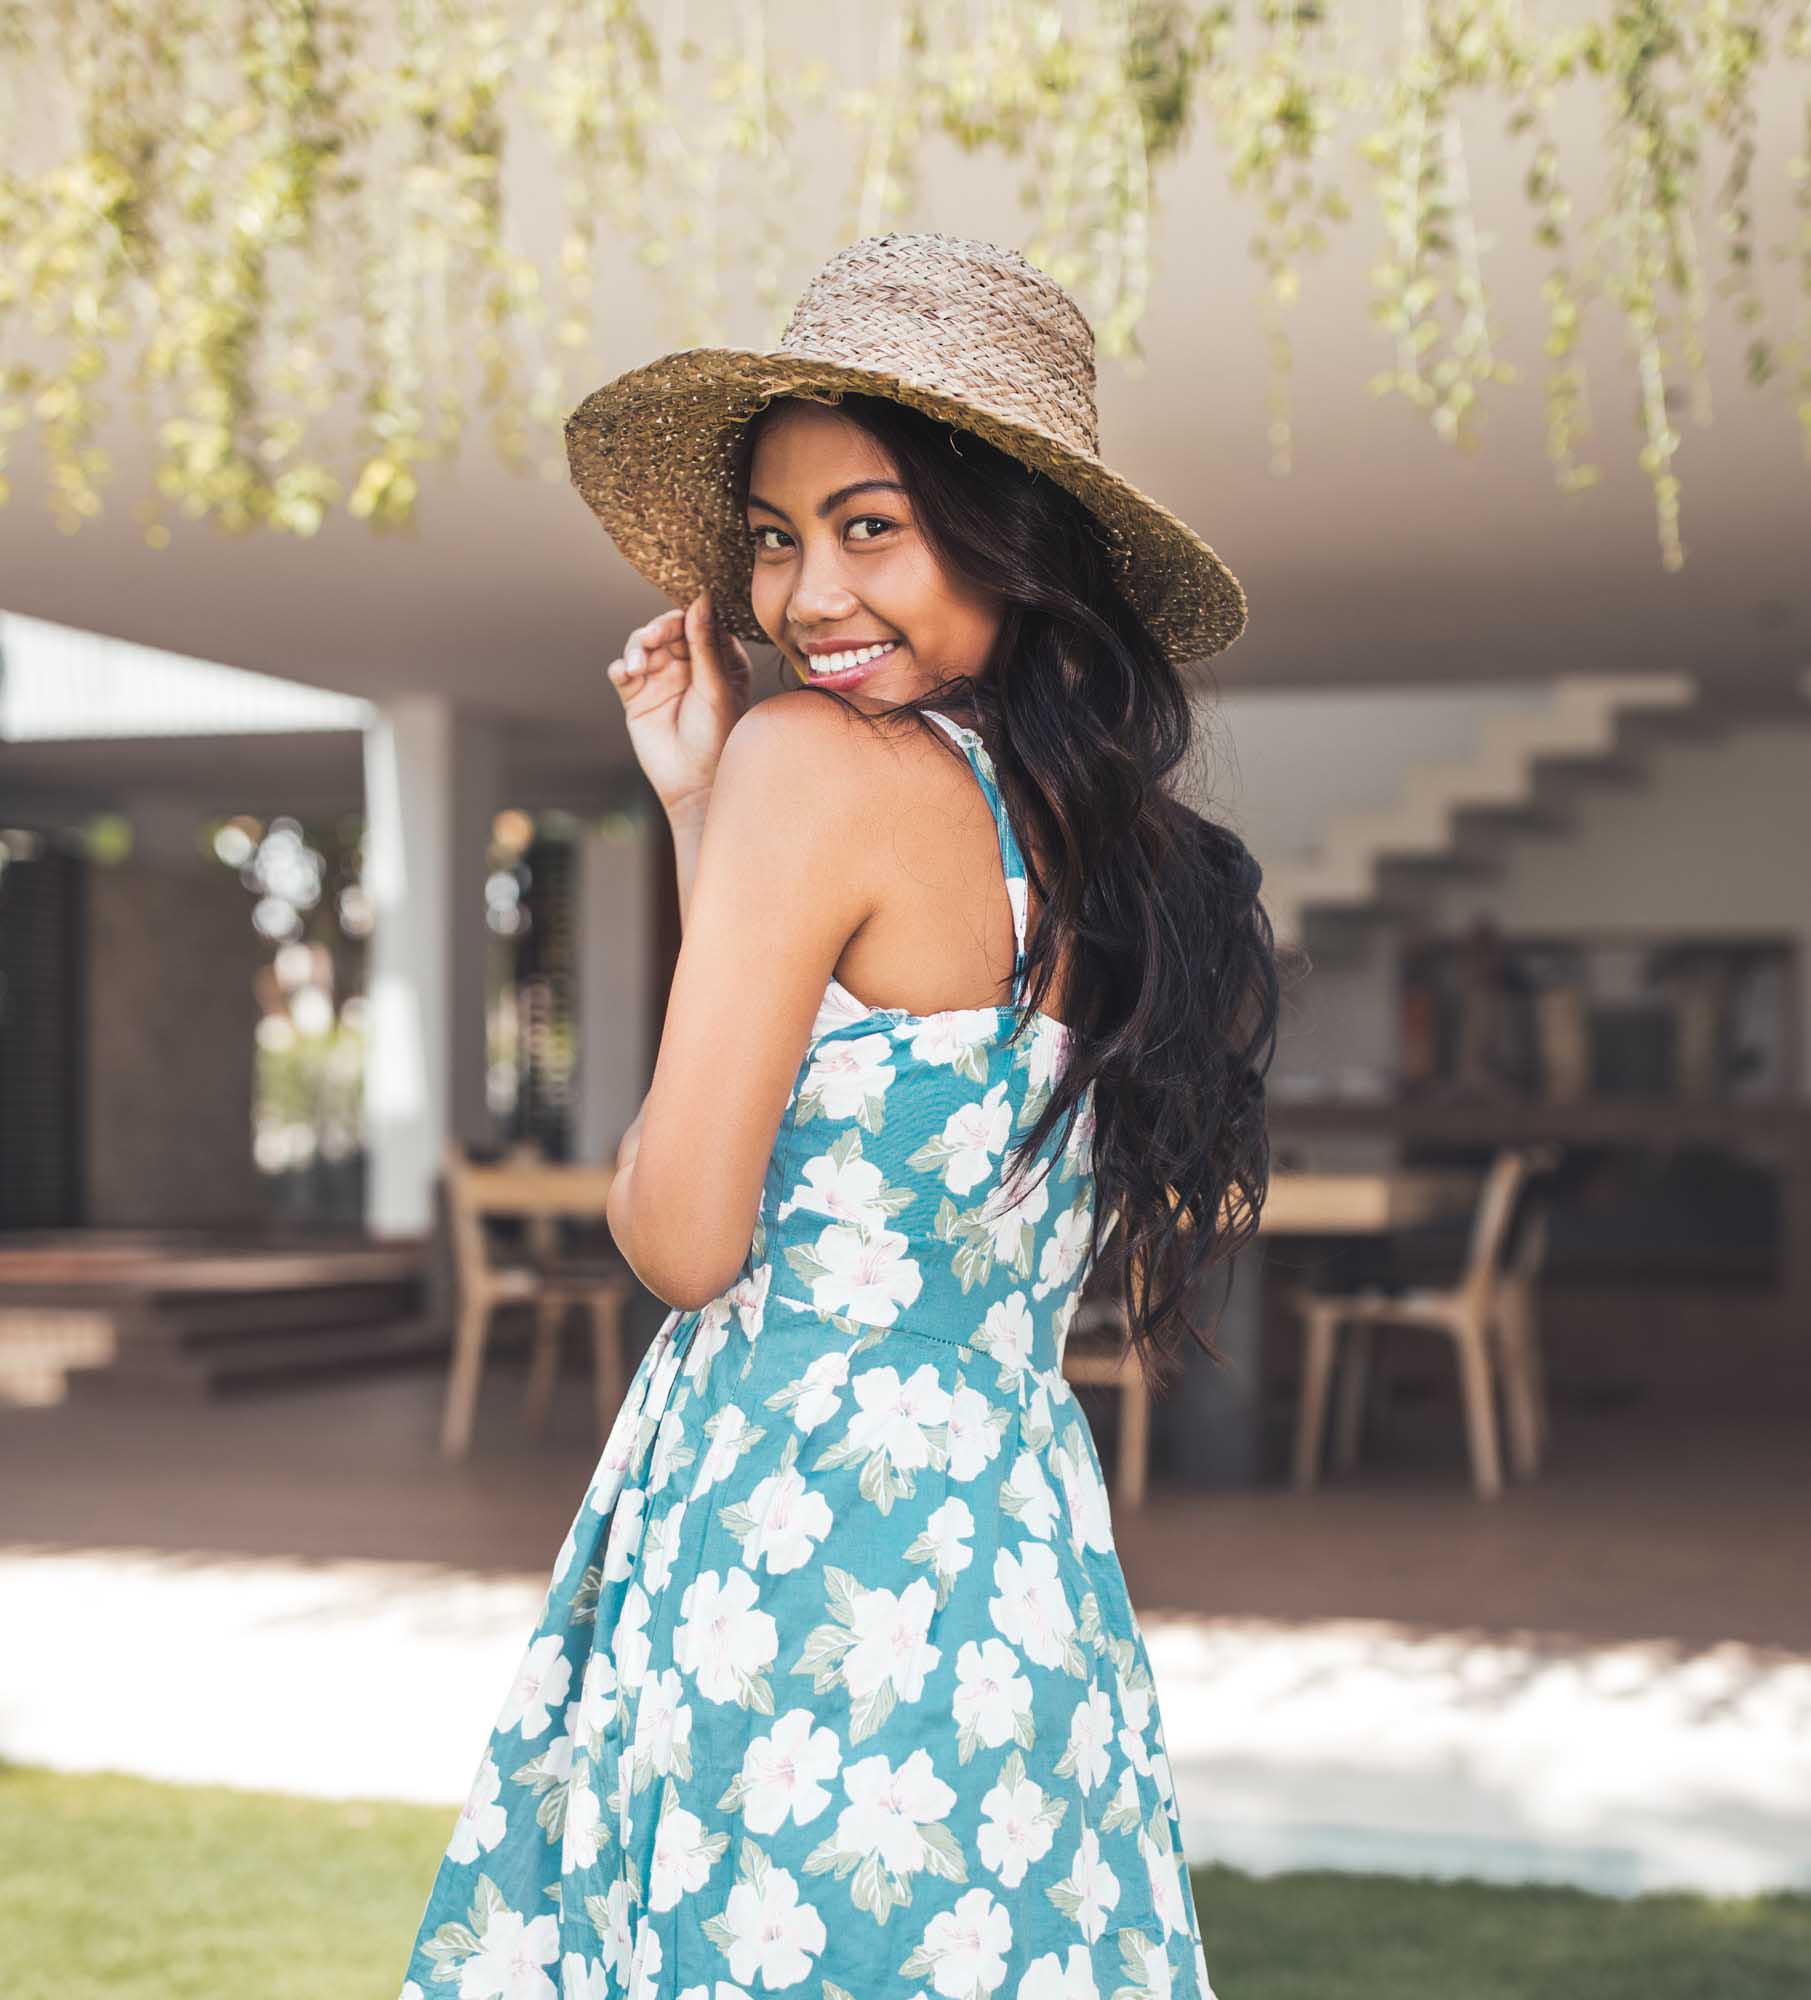 Asian girl in flower dress models with a hat at luxury villa | Fashion Photography | Portraiture | Canggu, Bali | Denver Photographer | Mike Olmsted